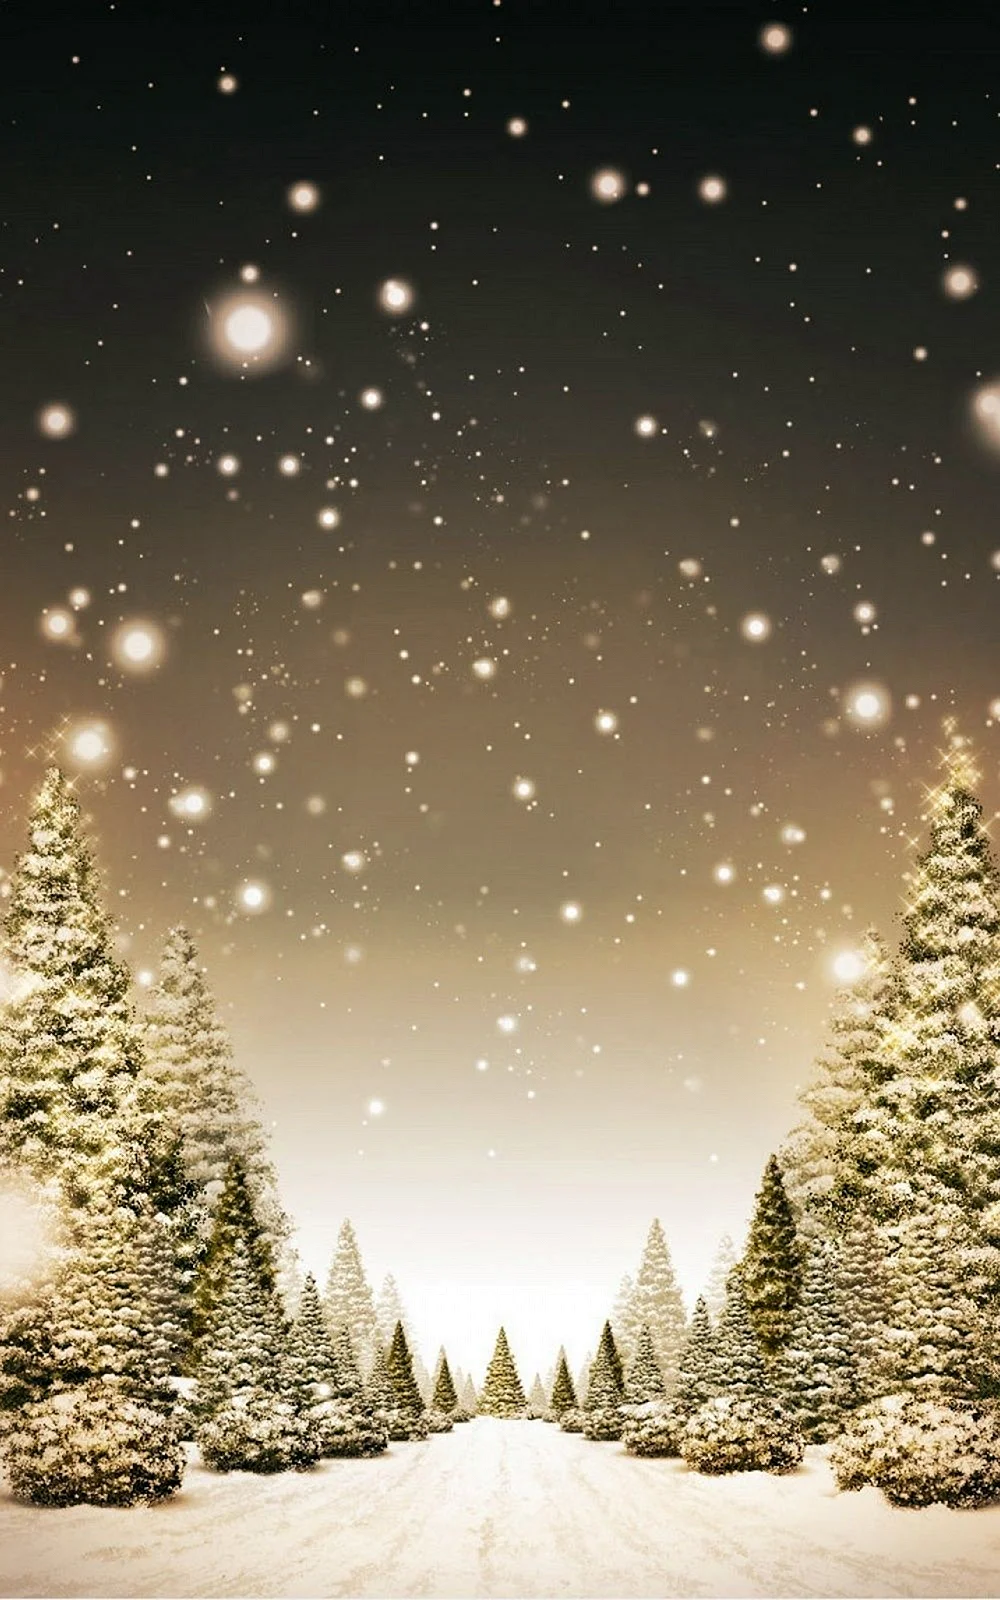 Snowy Christmas Wallpaper For iPhone